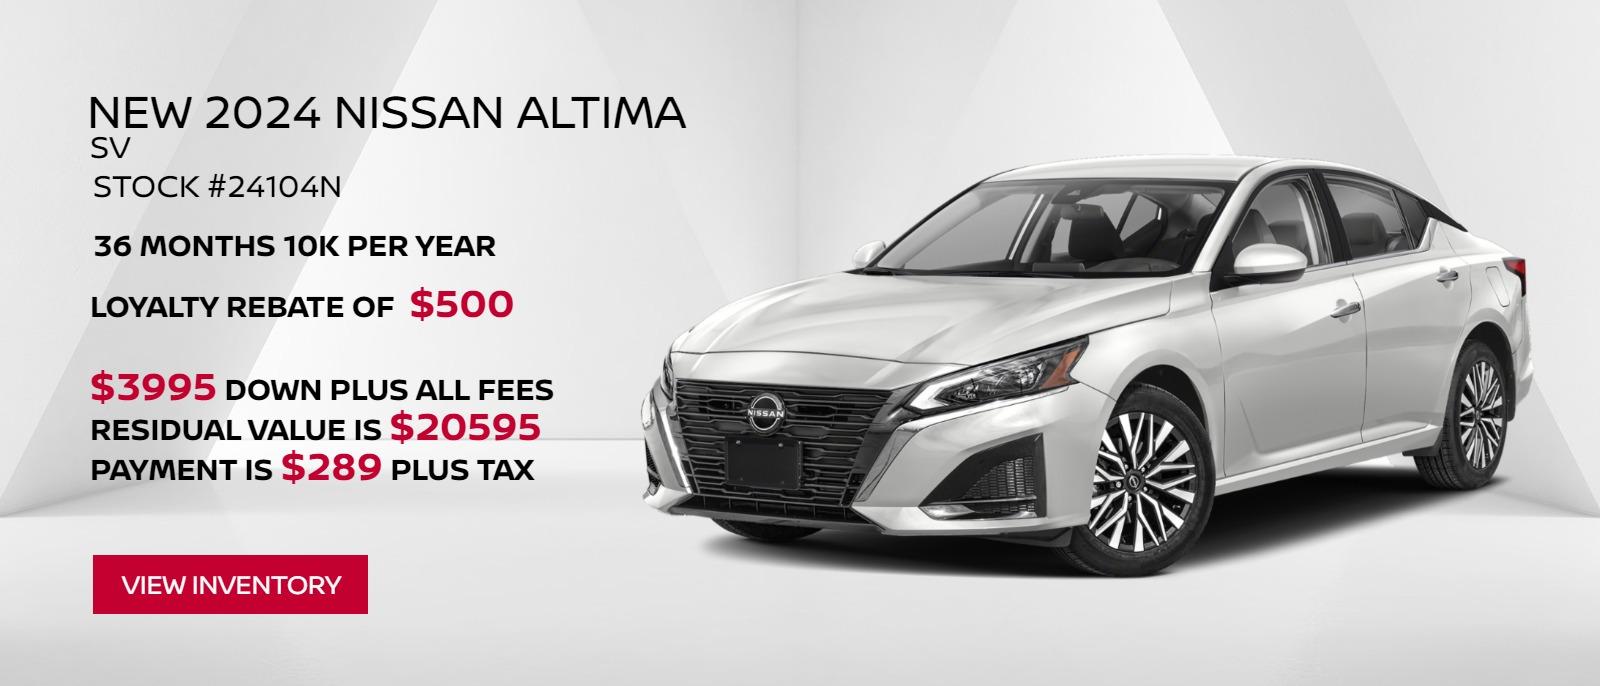 stk #24104N
24 nissan altima sv lease 36 months 10k per year 3995.00 down plus all fees residual value is 21531.45 payment is 289.00 plus tax + loyalty rebate of 500